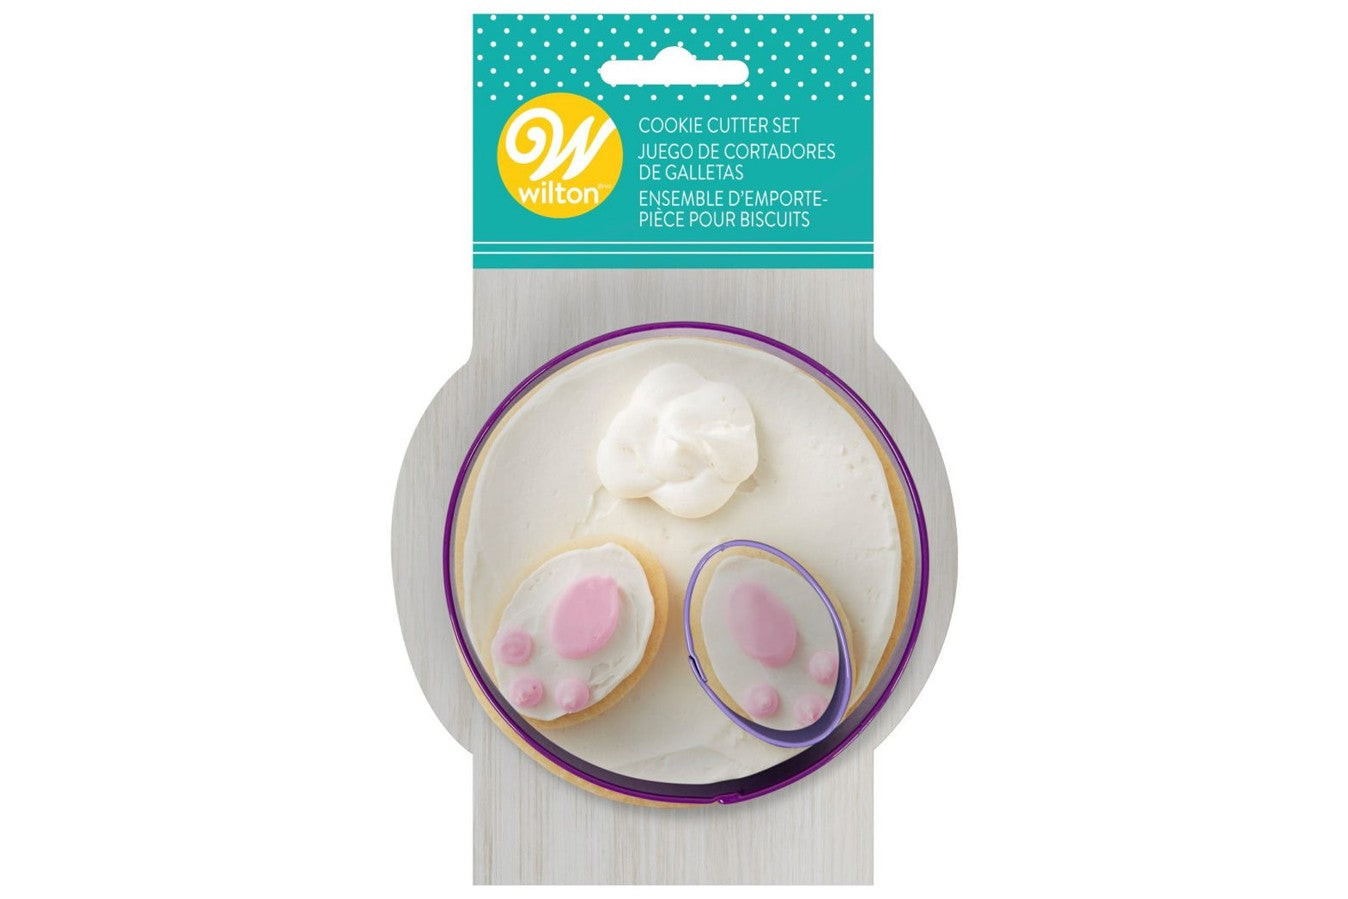 Wilton Easter Cookie Cutter Set - The Cooks Cupboard Ltd